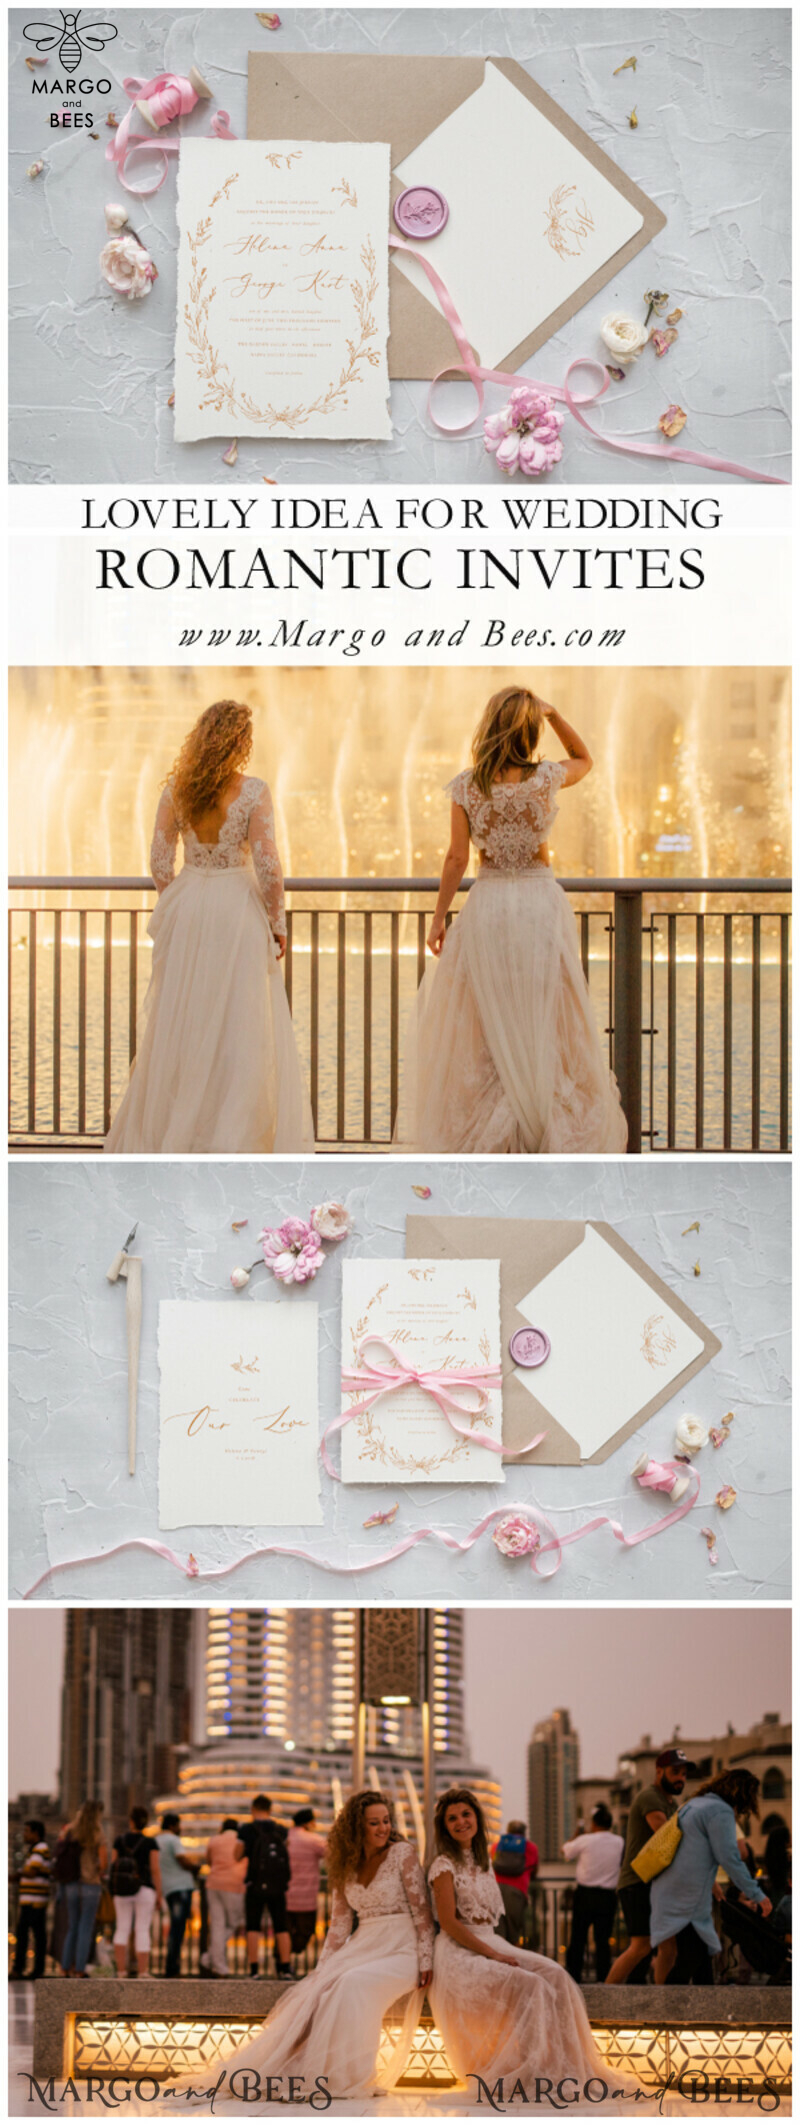 Create the Perfect First Impression with Minimalistic and Modern Wedding Invitations and Handmade, Elegant Wedding Invites - Introducing Bespoke Wedding Stationery for Your Romantic Wedding Cards-3